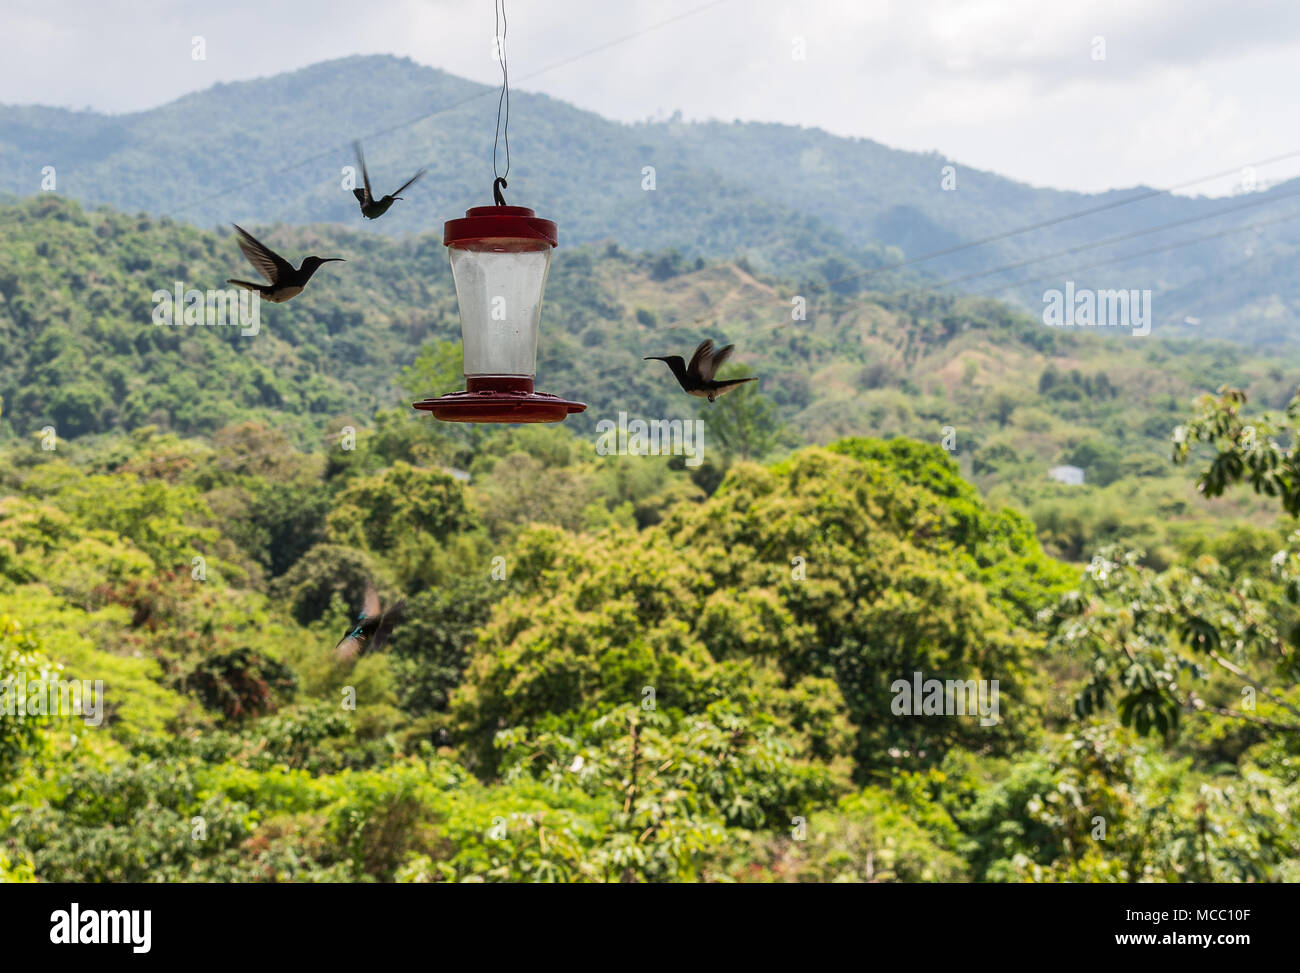 Hummingbirds feeding at a feeder in the foothills of Sierra Nevada, Minca, Northern Colombia, South America. Stock Photo